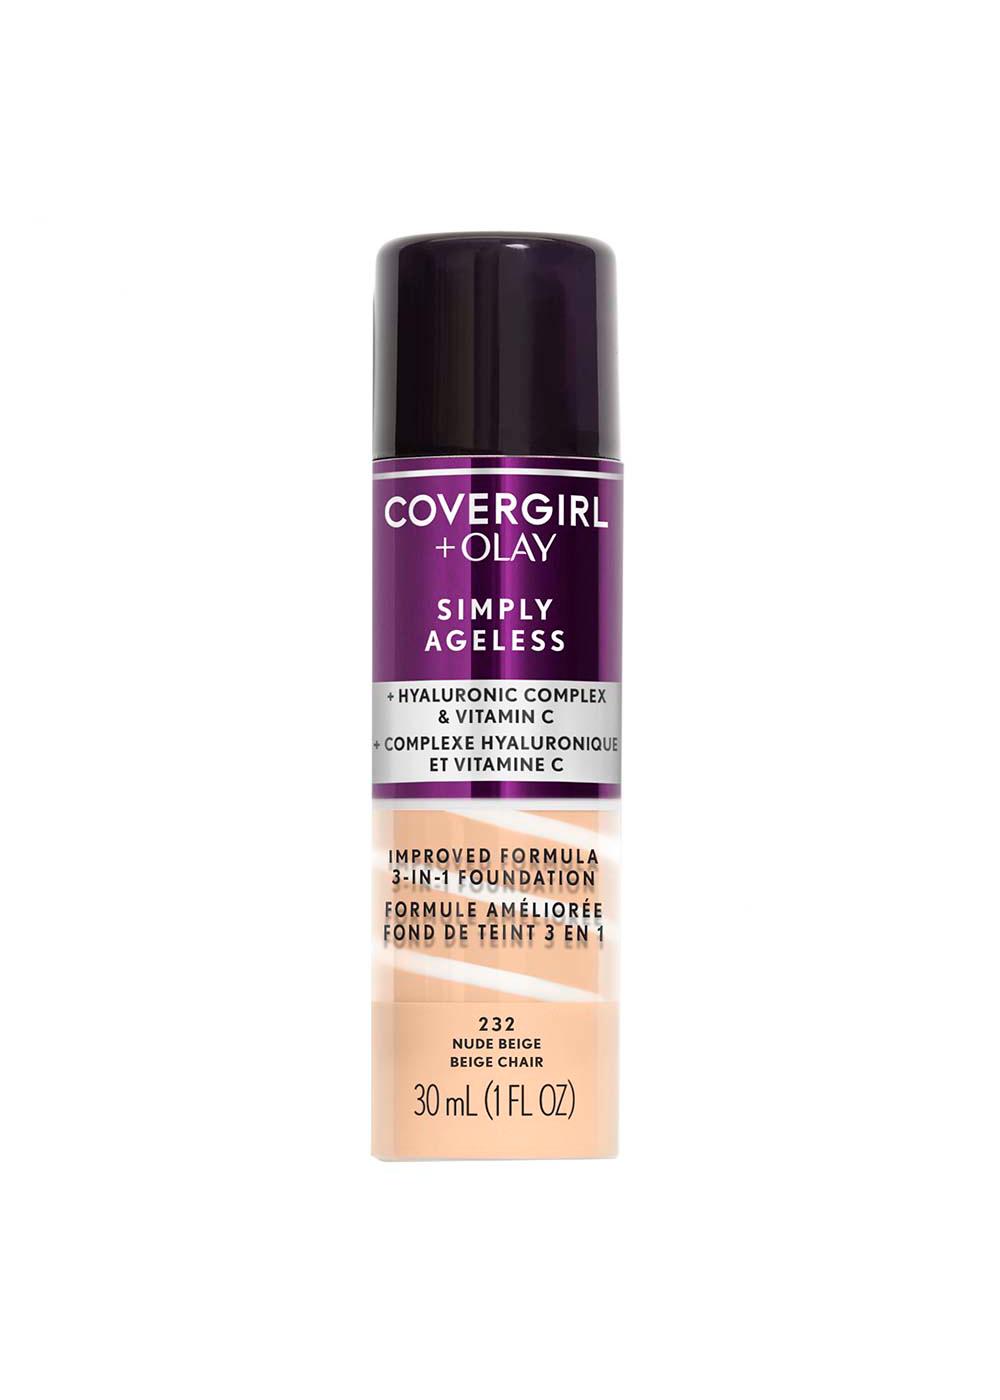 Covergirl Simply Ageless 3-in-1 Liquid Foundation 232 Nude Beige; image 1 of 5